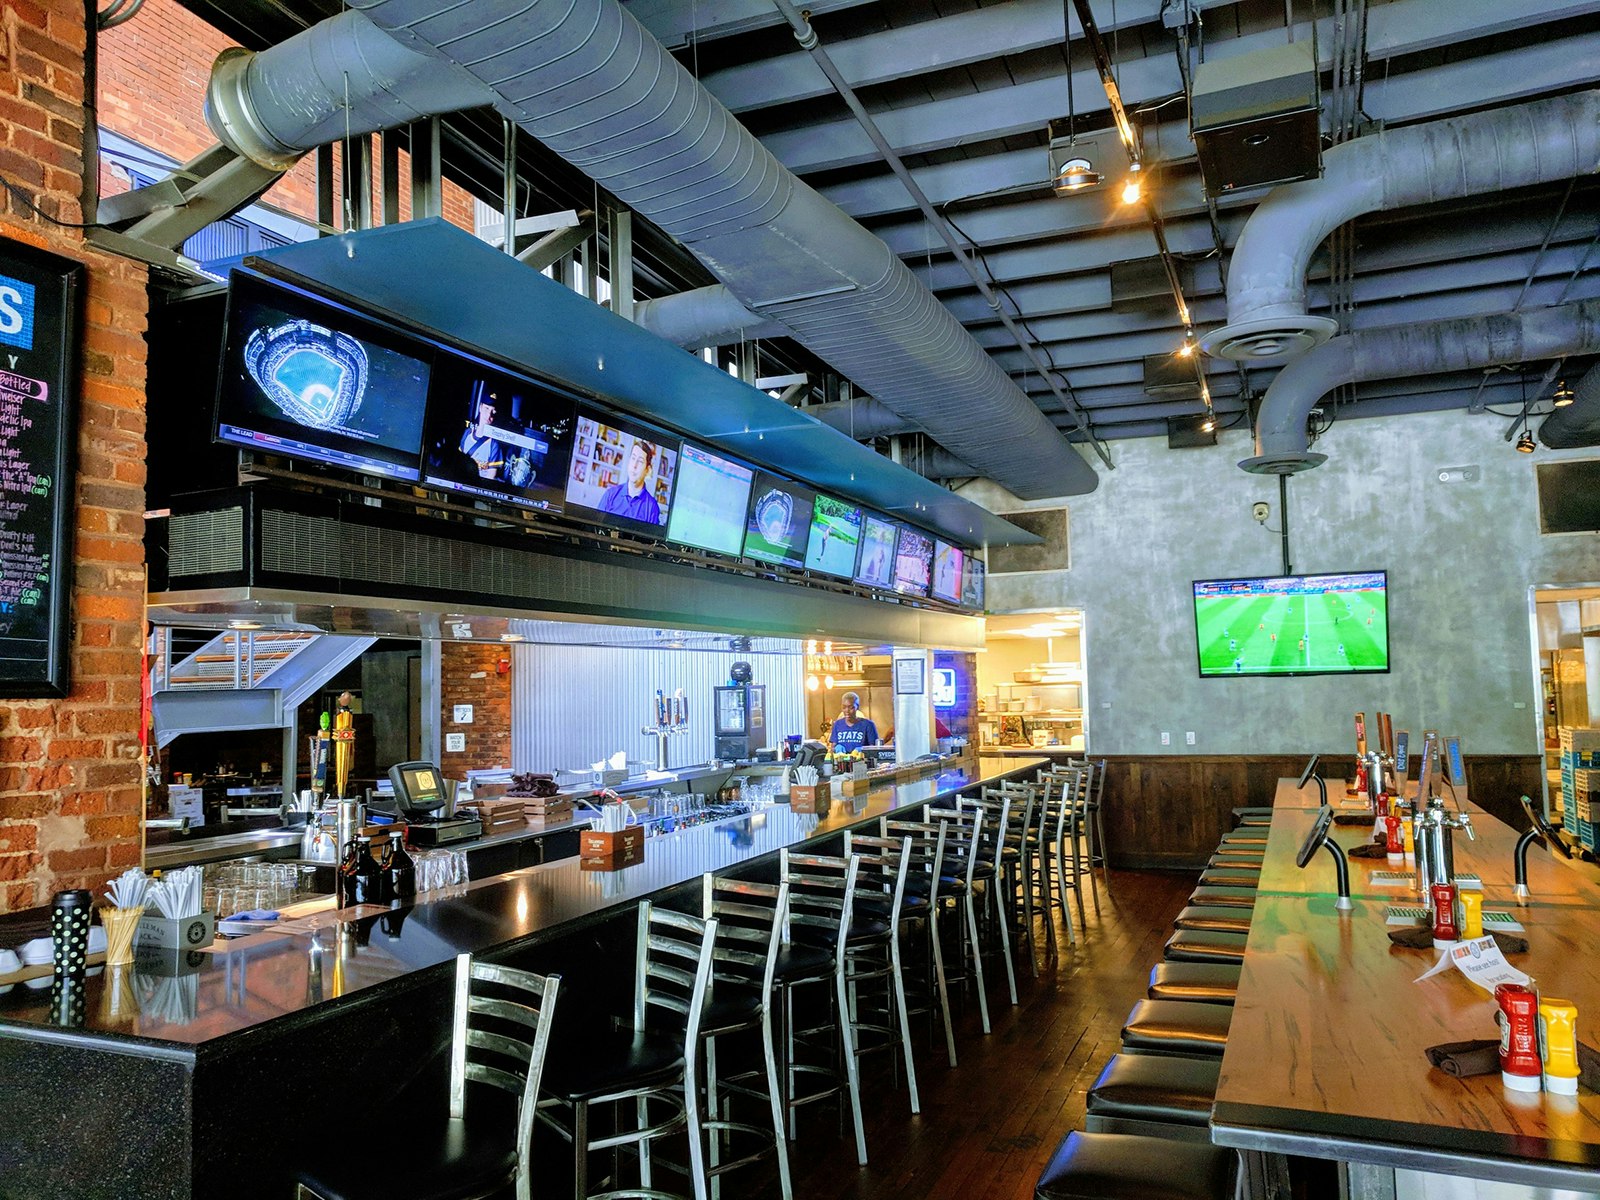 Interior shot of a long bar with a black top and silver bar-height chairs lined up, facing a row of TVs